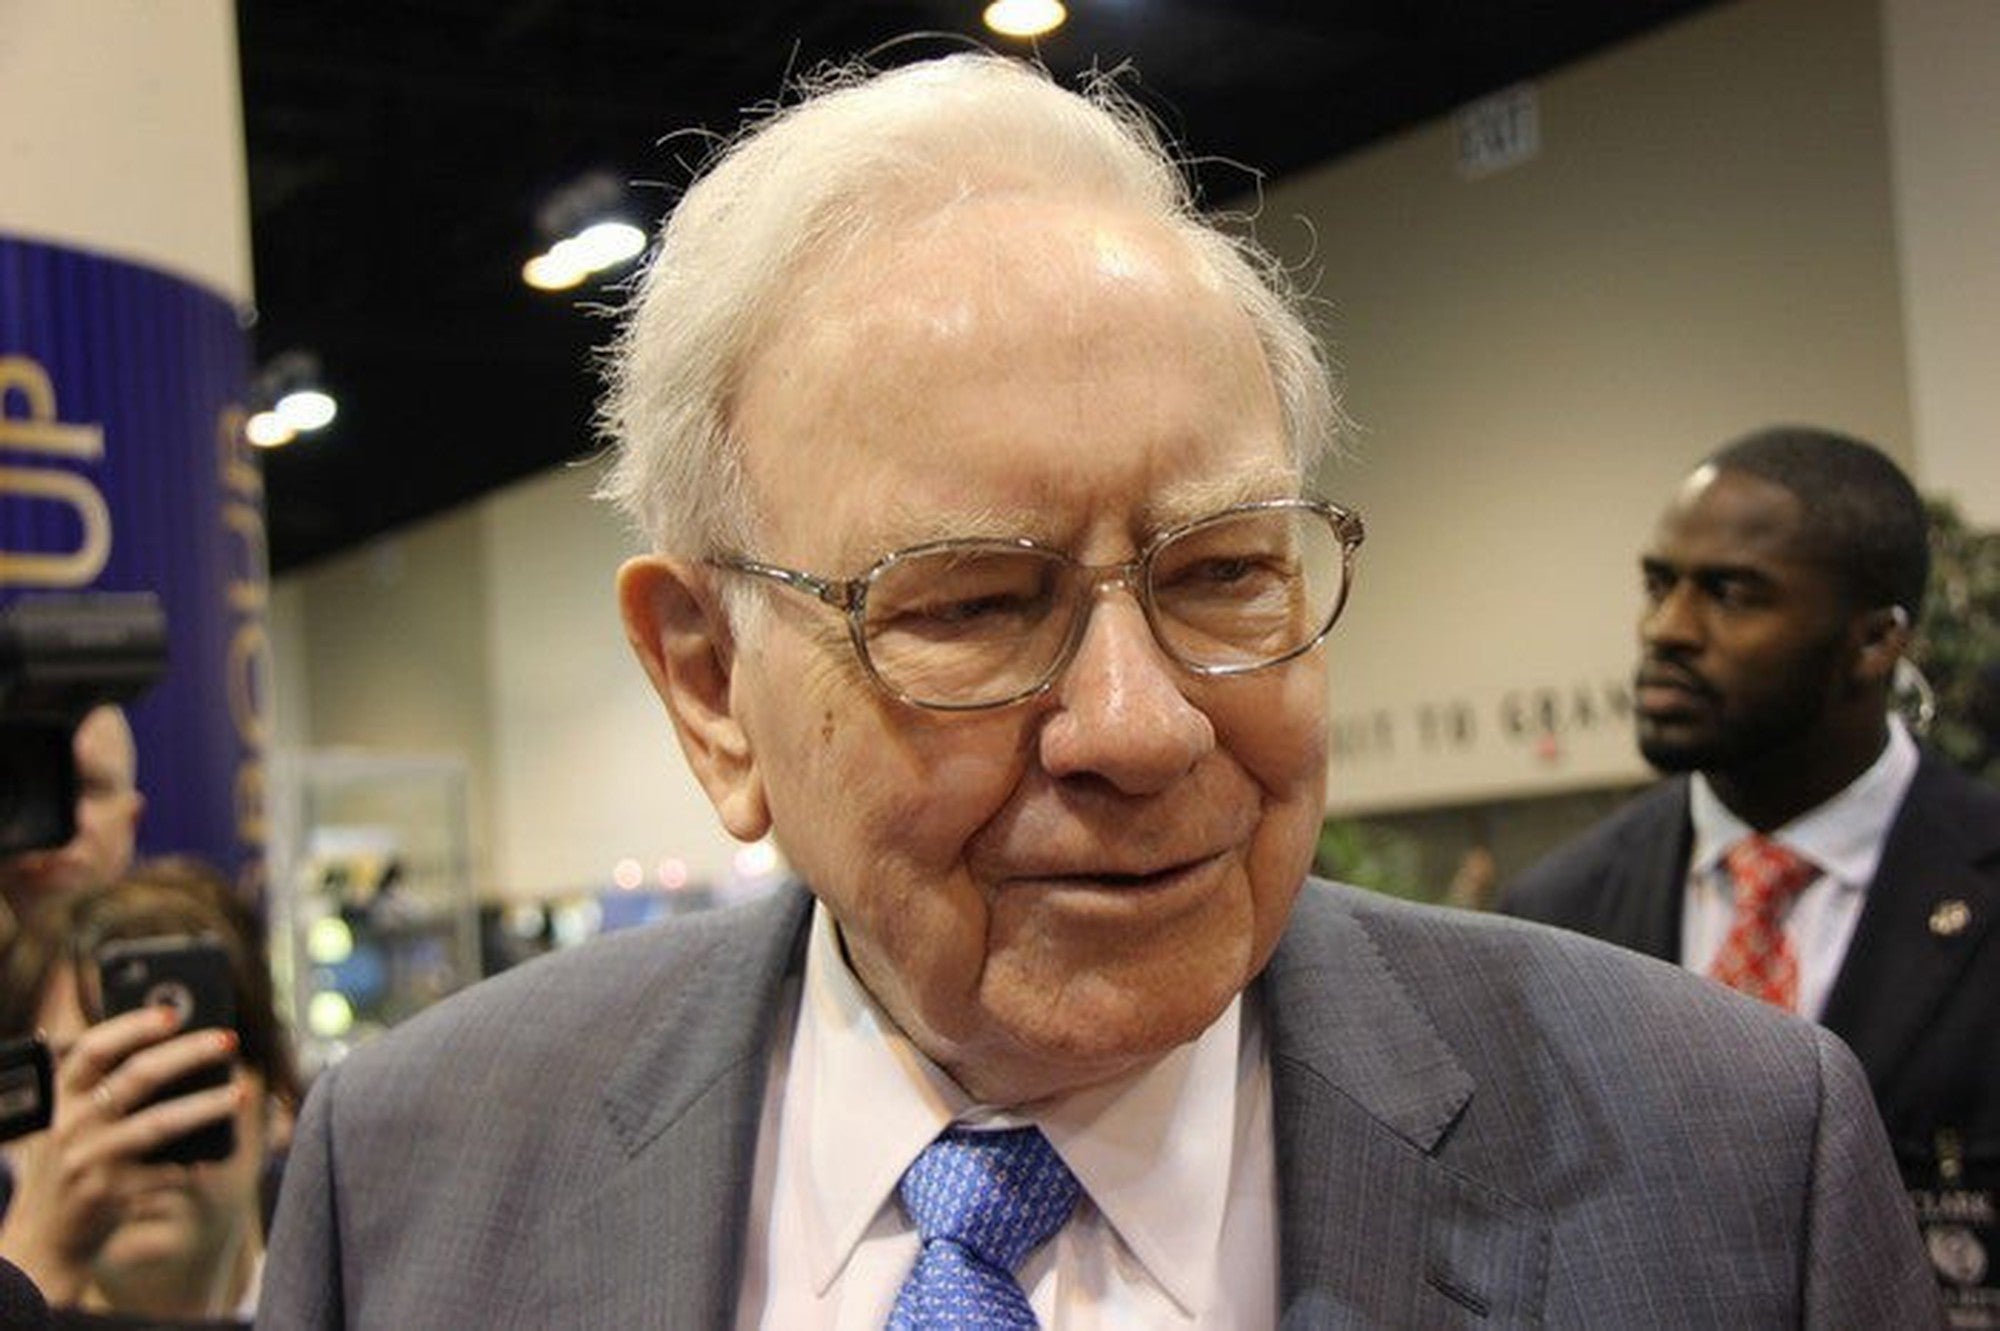 4 Finance Stocks Warren Buffett Has Owned for Over a Decade – The Motley Fool